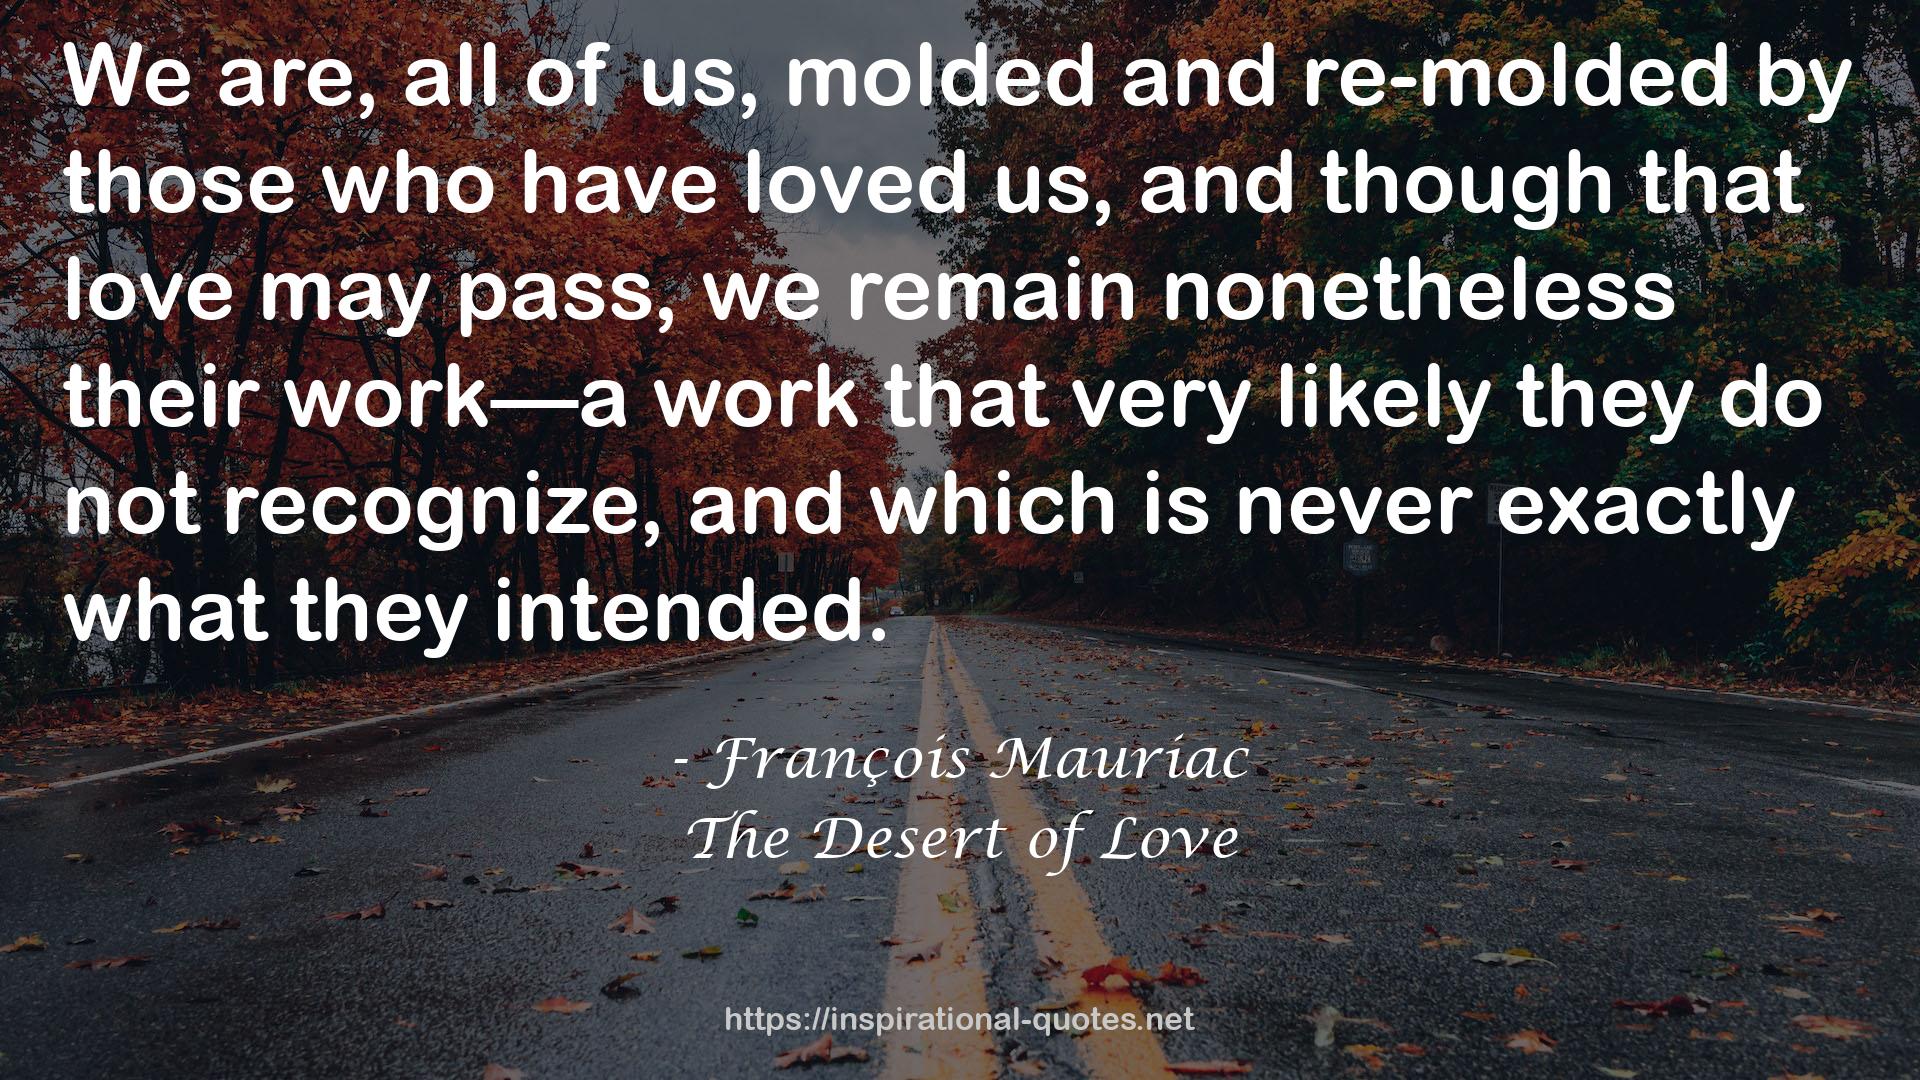 The Desert of Love QUOTES